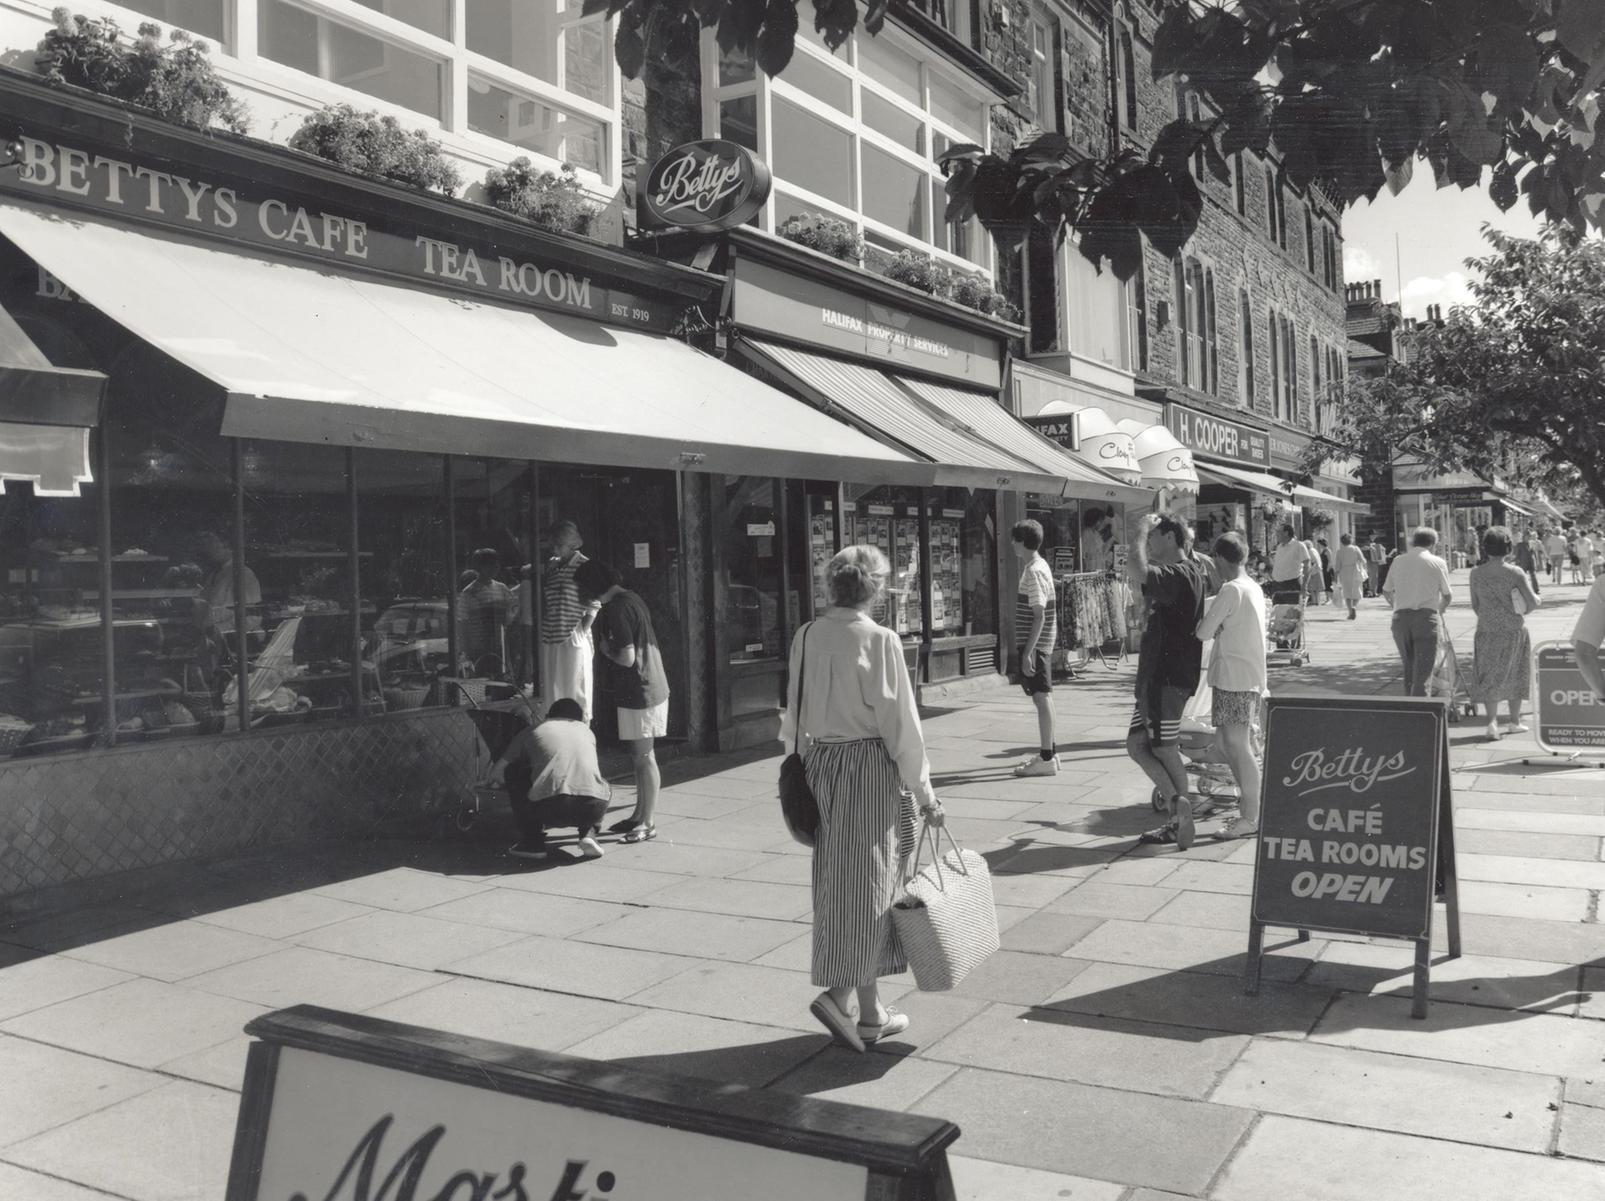 The Grove was home to a wide variety of specialist shops in the mid-1990s.